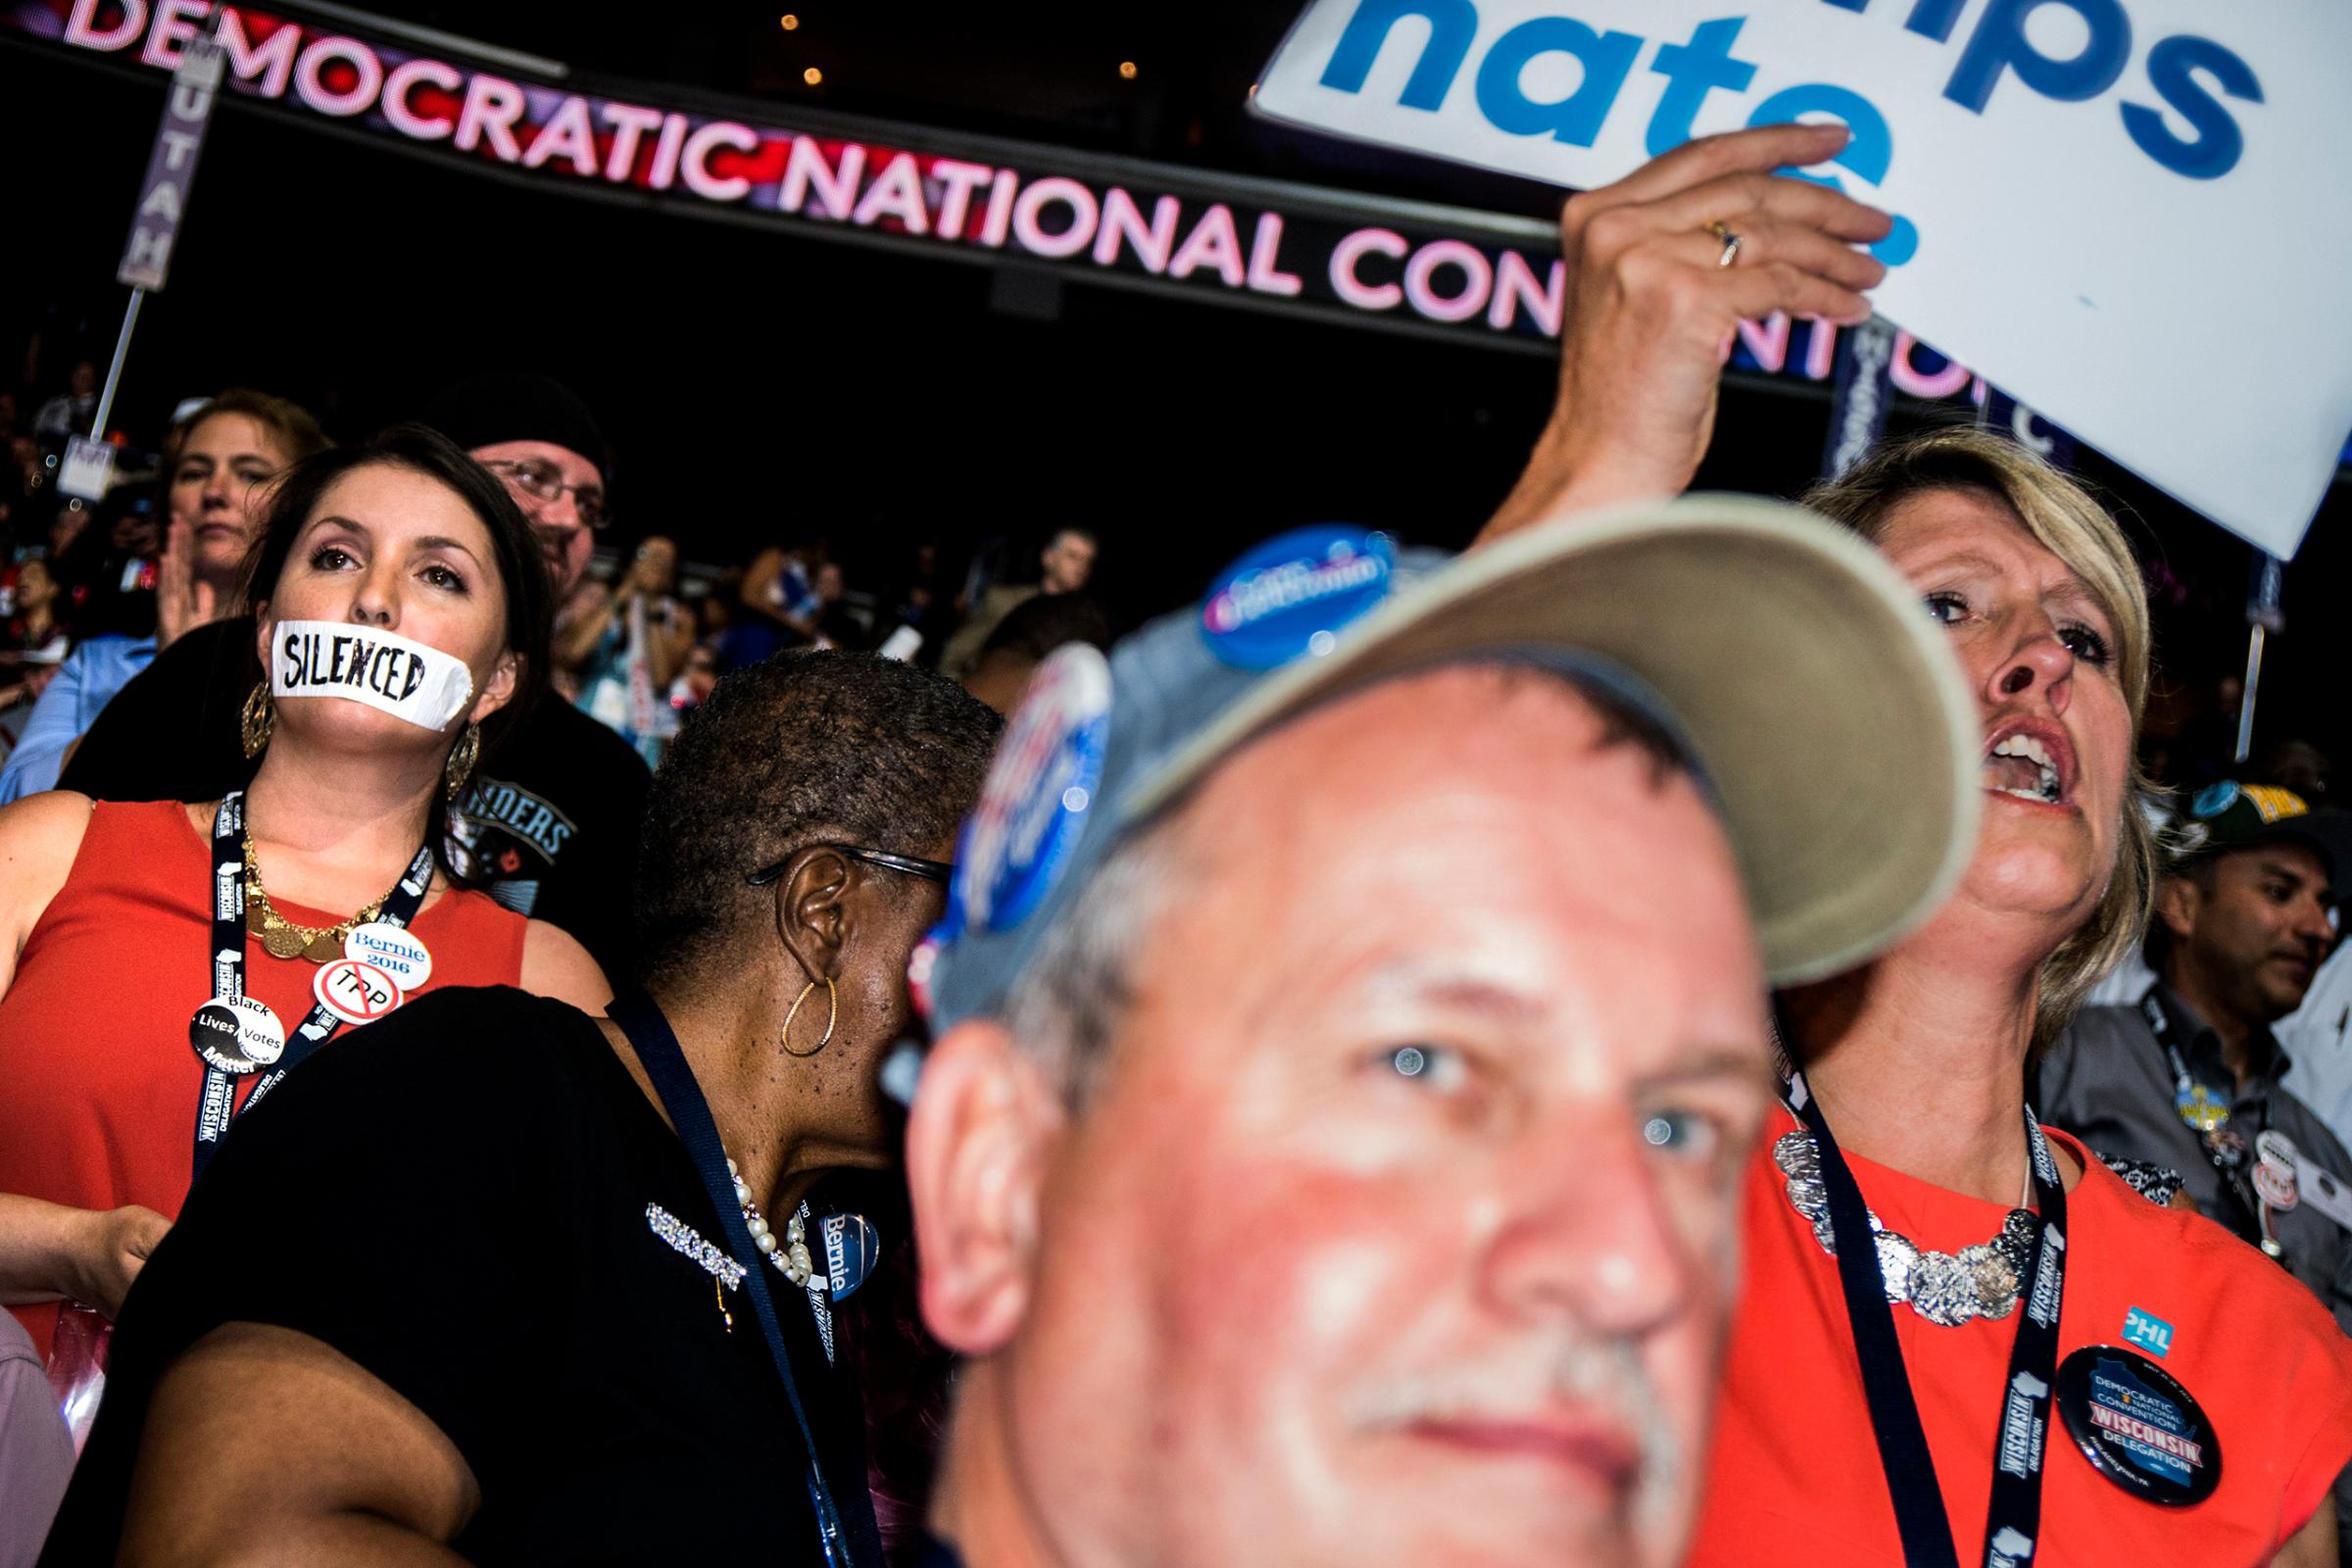 Scenes from the Democratic National Convention on Monday, July 25, 2016.